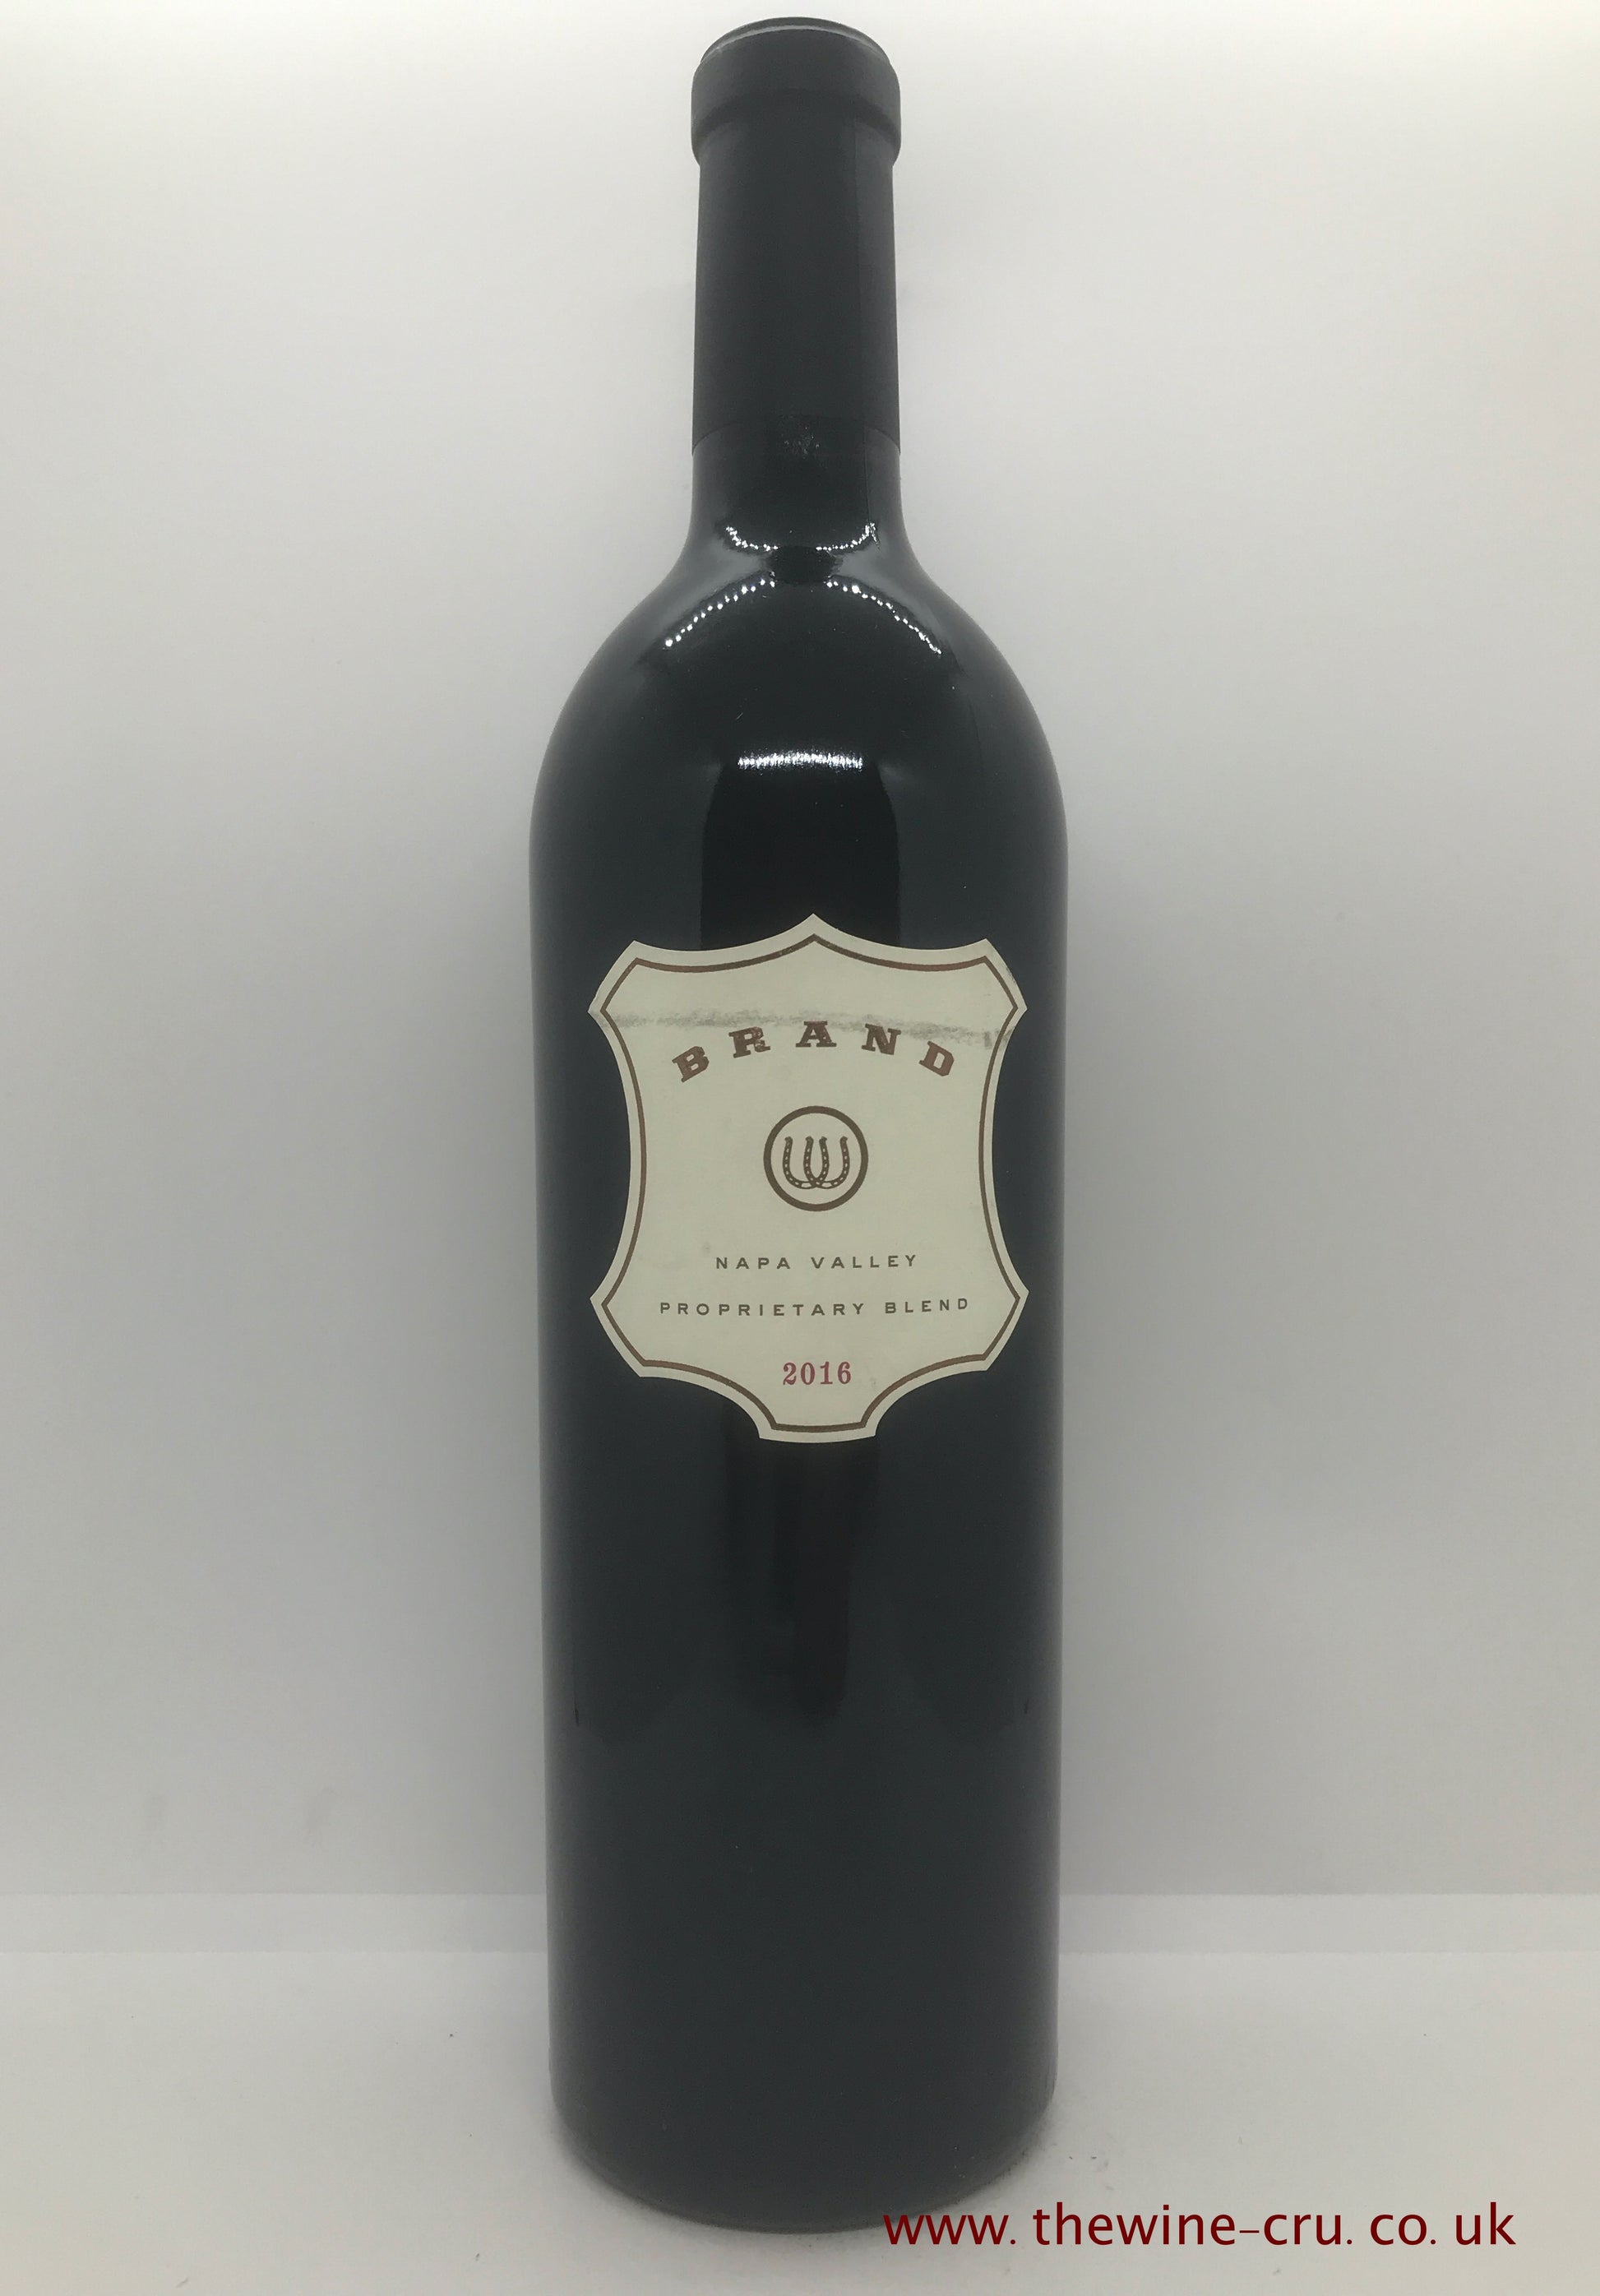 A bottle on 2016 vintage red wine. Brand Proprietary Blend 2016. USA, California. Immediate delivery. Free local delivery. Gift wrapping available.